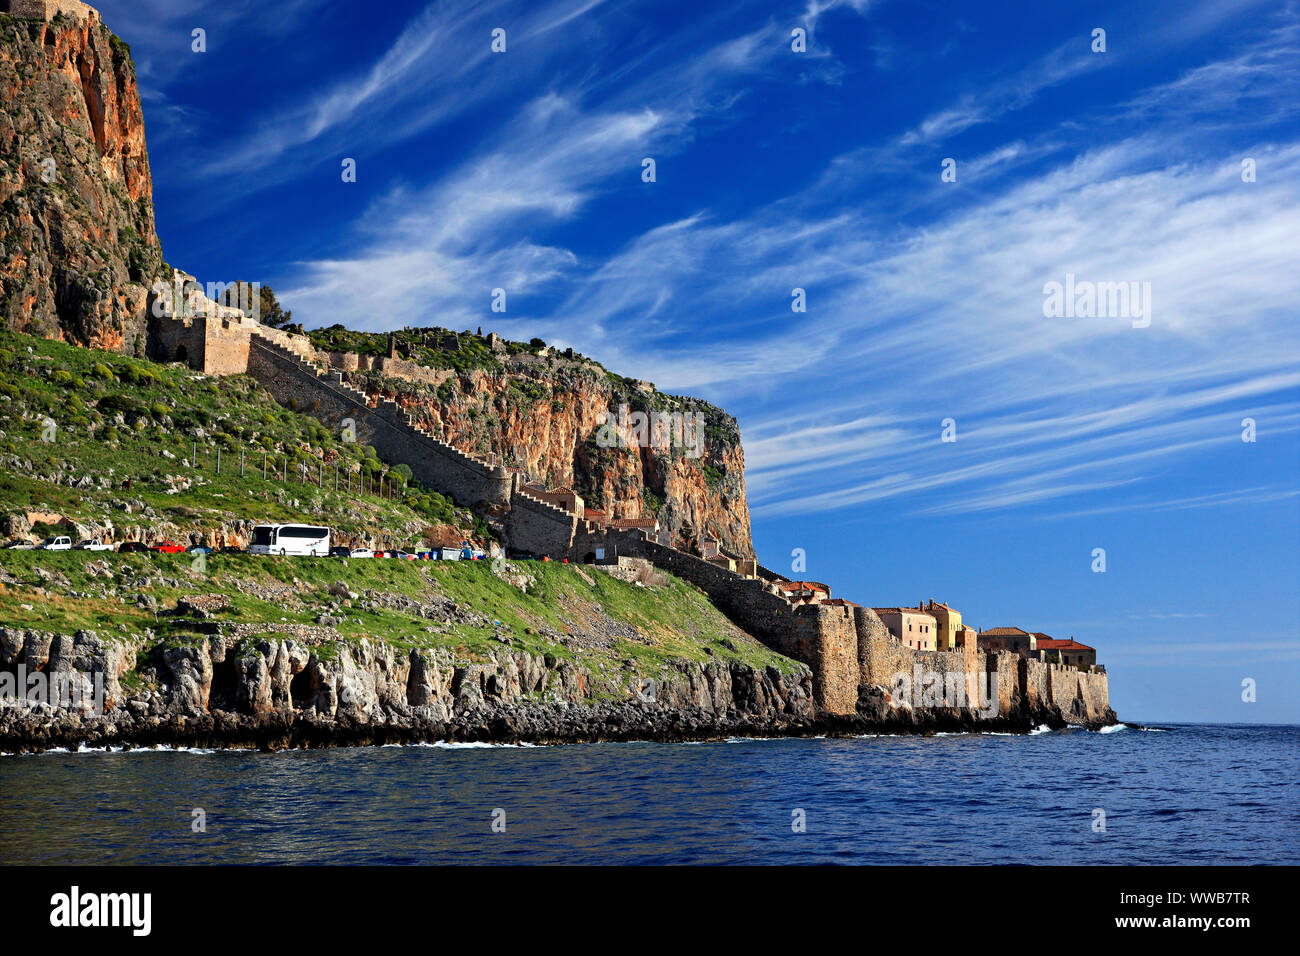 Impressive view of the medieval 'castletown' of Monemvasia from the sea. Lakonia, Peloponnese, Greece. Stock Photo